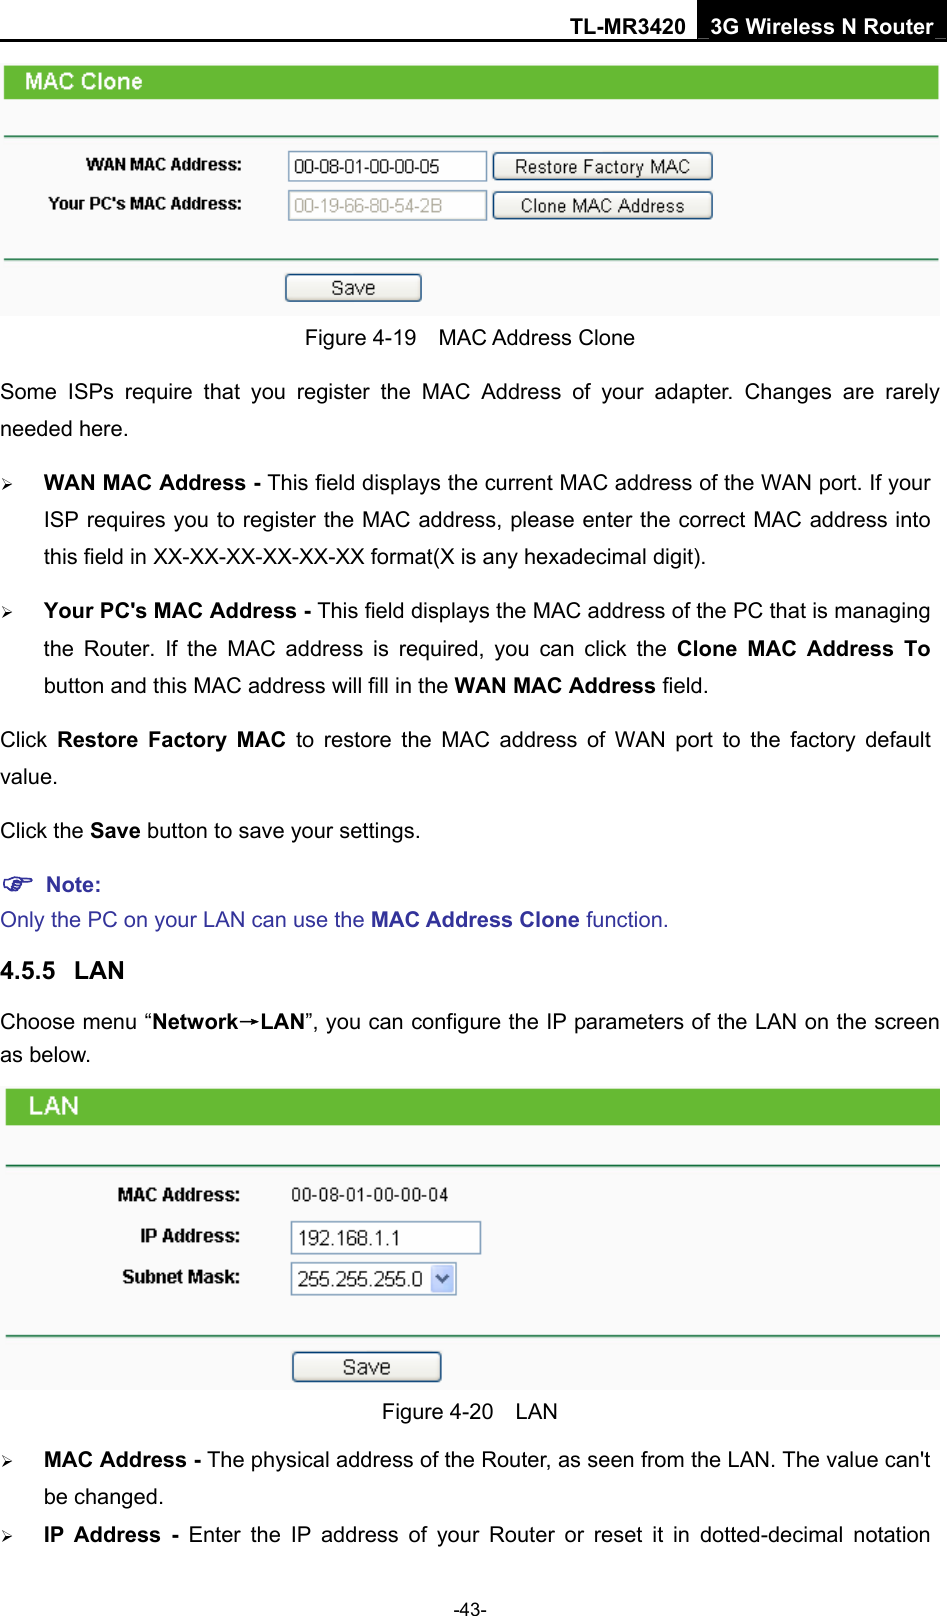 TL-MR3420 3G Wireless N Router -43-  Figure 4-19  MAC Address Clone Some ISPs require that you register the MAC Address of your adapter. Changes are rarely needed here. ¾ WAN MAC Address - This field displays the current MAC address of the WAN port. If your ISP requires you to register the MAC address, please enter the correct MAC address into this field in XX-XX-XX-XX-XX-XX format(X is any hexadecimal digit).   ¾ Your PC&apos;s MAC Address - This field displays the MAC address of the PC that is managing the Router. If the MAC address is required, you can click the Clone MAC Address To button and this MAC address will fill in the WAN MAC Address field. Click  Restore Factory MAC to restore the MAC address of WAN port to the factory default value. Click the Save button to save your settings. ) Note:  Only the PC on your LAN can use the MAC Address Clone function. 4.5.5  LAN Choose menu “Network→LAN”, you can configure the IP parameters of the LAN on the screen as below.  Figure 4-20  LAN ¾ MAC Address - The physical address of the Router, as seen from the LAN. The value can&apos;t be changed. ¾ IP Address - Enter the IP address of your Router or reset it in dotted-decimal notation 